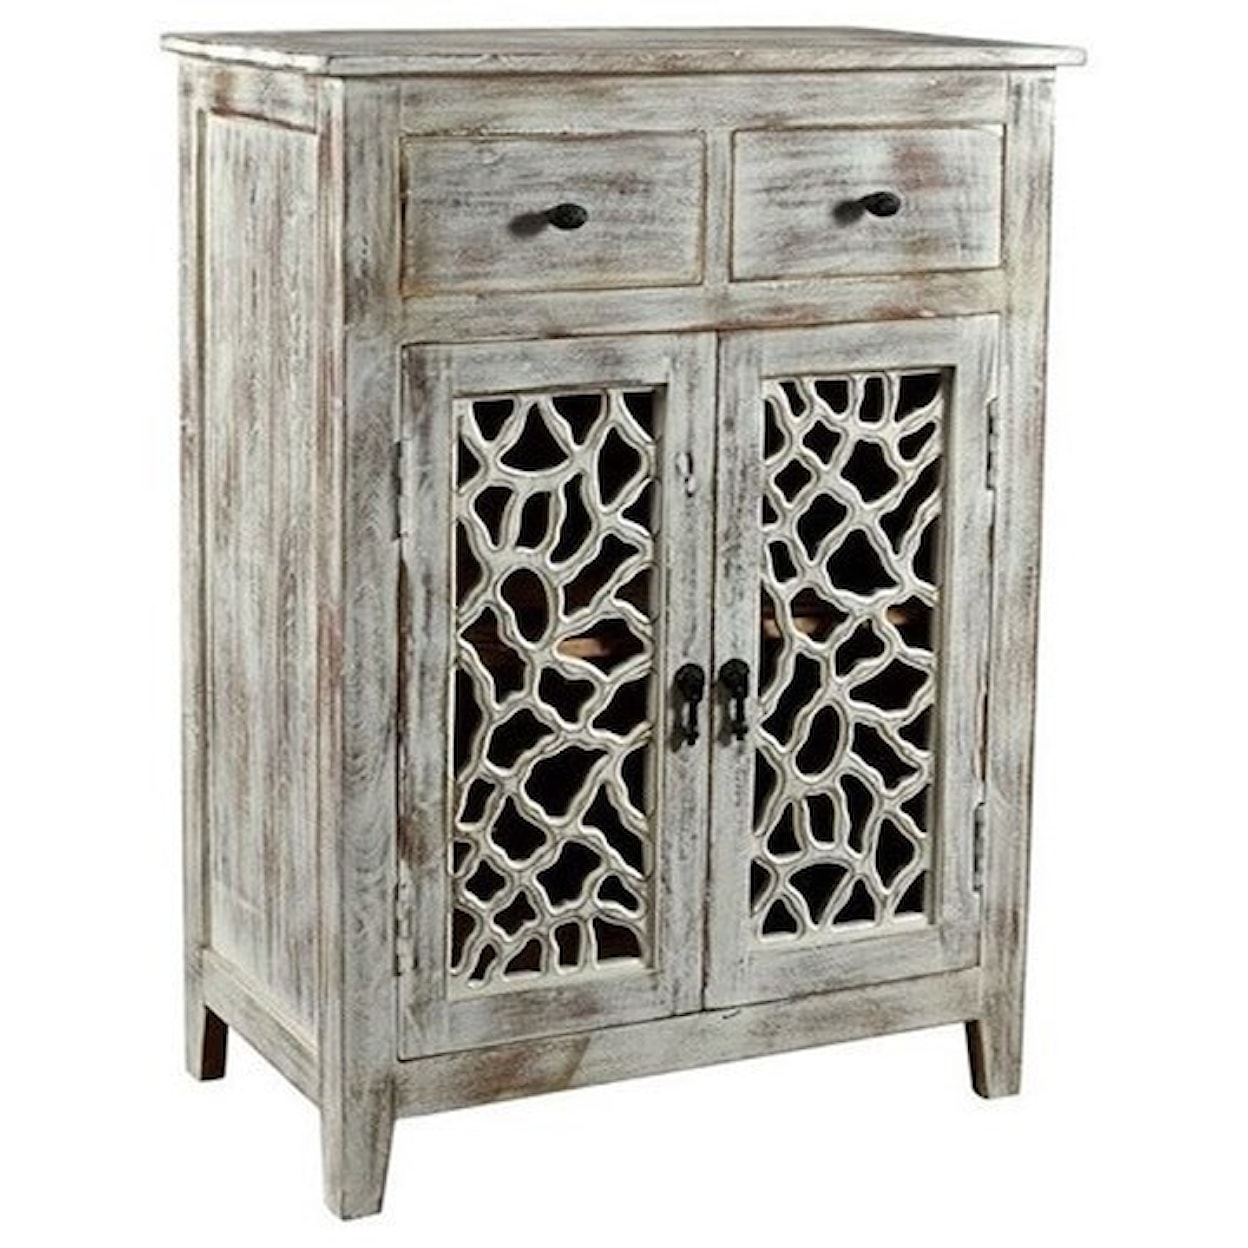 Crestview Collection Accent Furniture Mango Wood 2 Drawer Cabinet